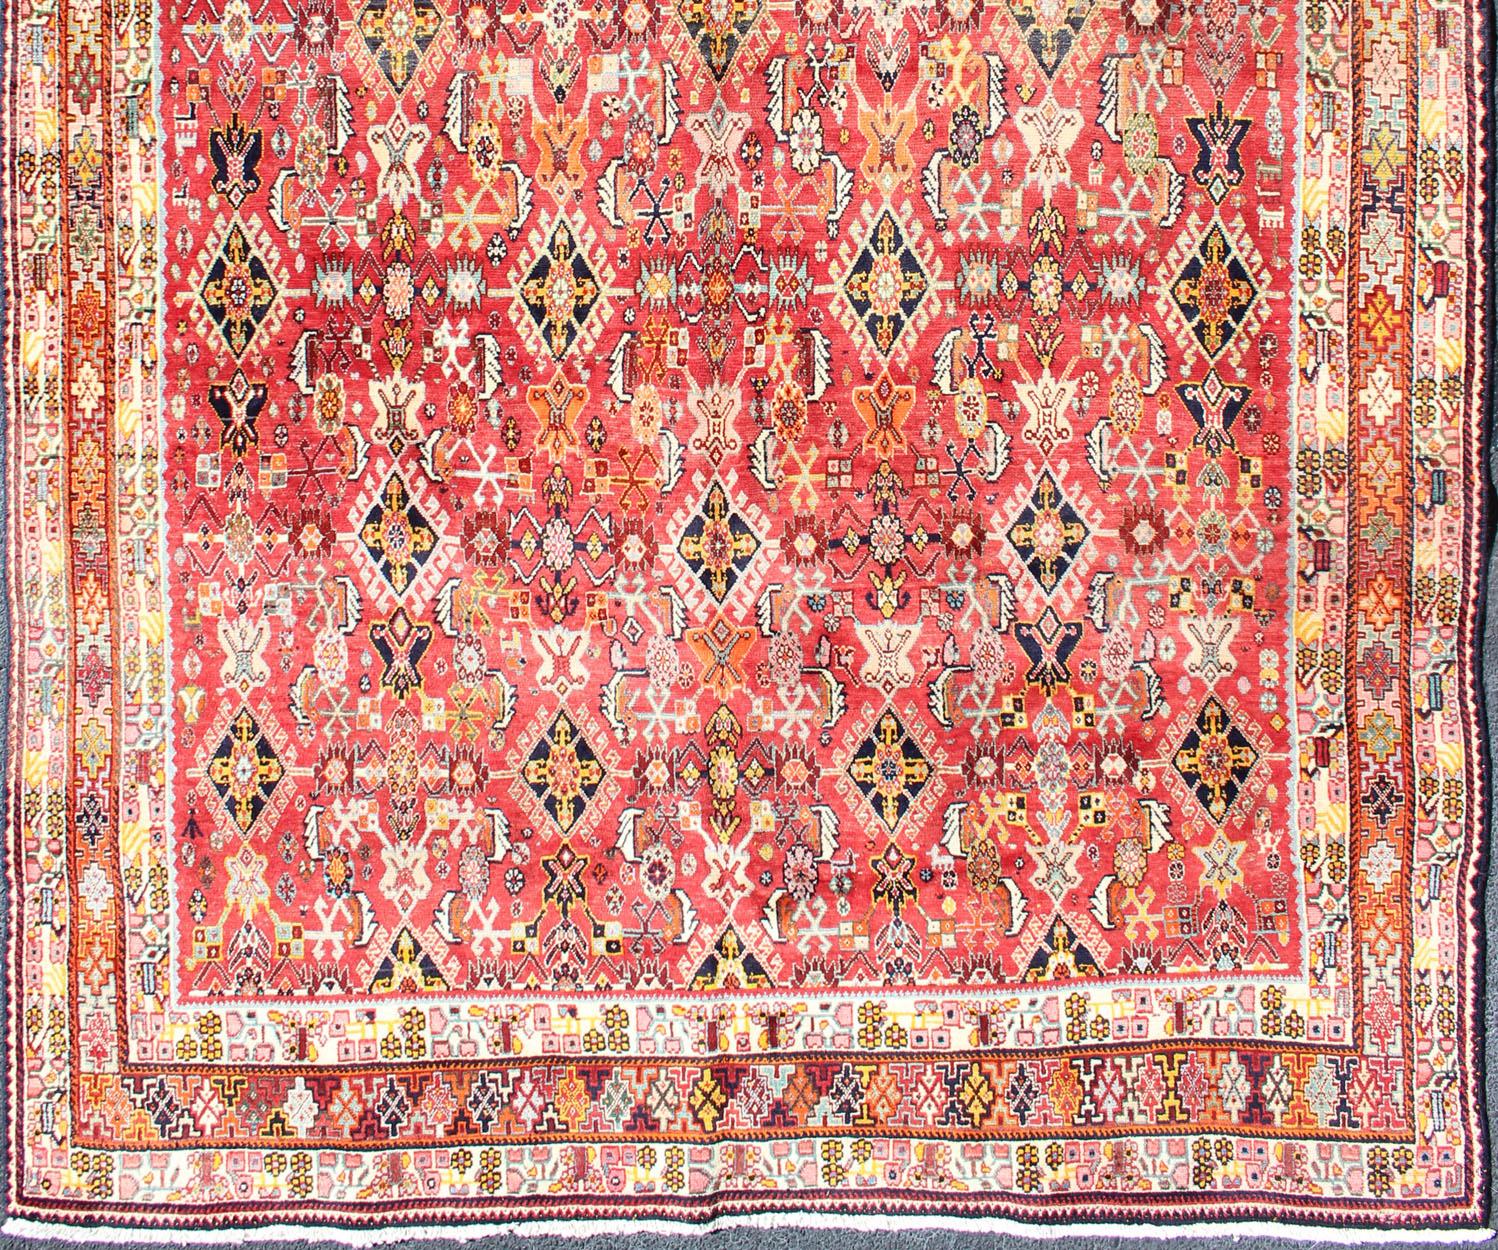 Beautiful red vintage Persian Qashqai rug with all-over Tribal Medallions and bright colors, rug H20-0902, country of origin / type: Iran / Qashqai, circa 1950

The Qashgai nomads are found in the Fars/Shiraz province in southwest Iran. They move